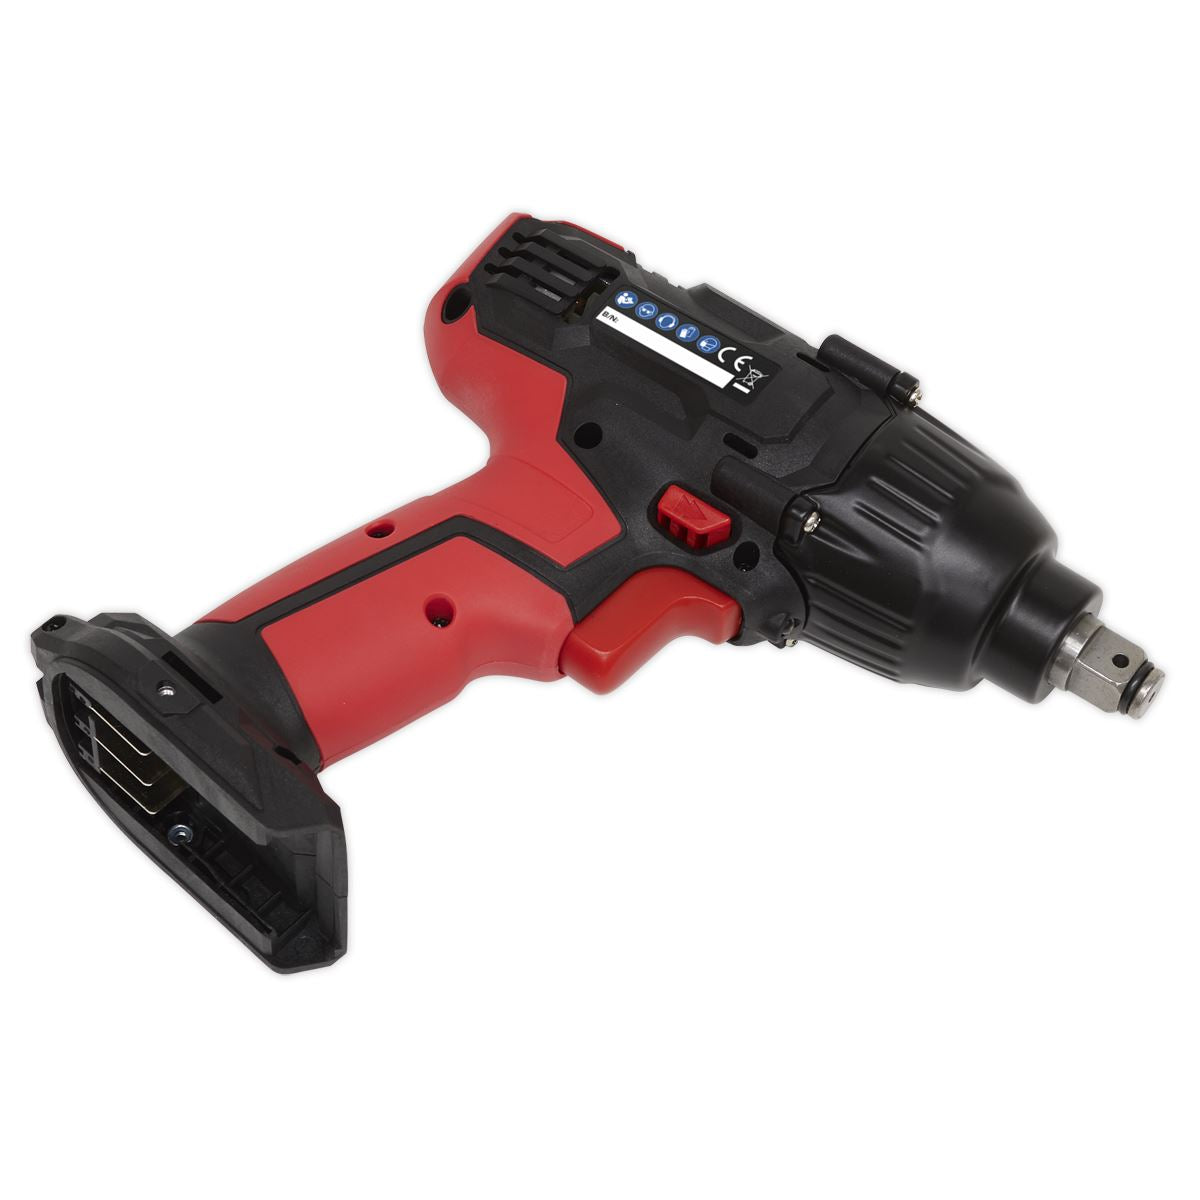 Sealey Impact Wrench 20V SV20 Series 1/2"Sq Drive - Body Only